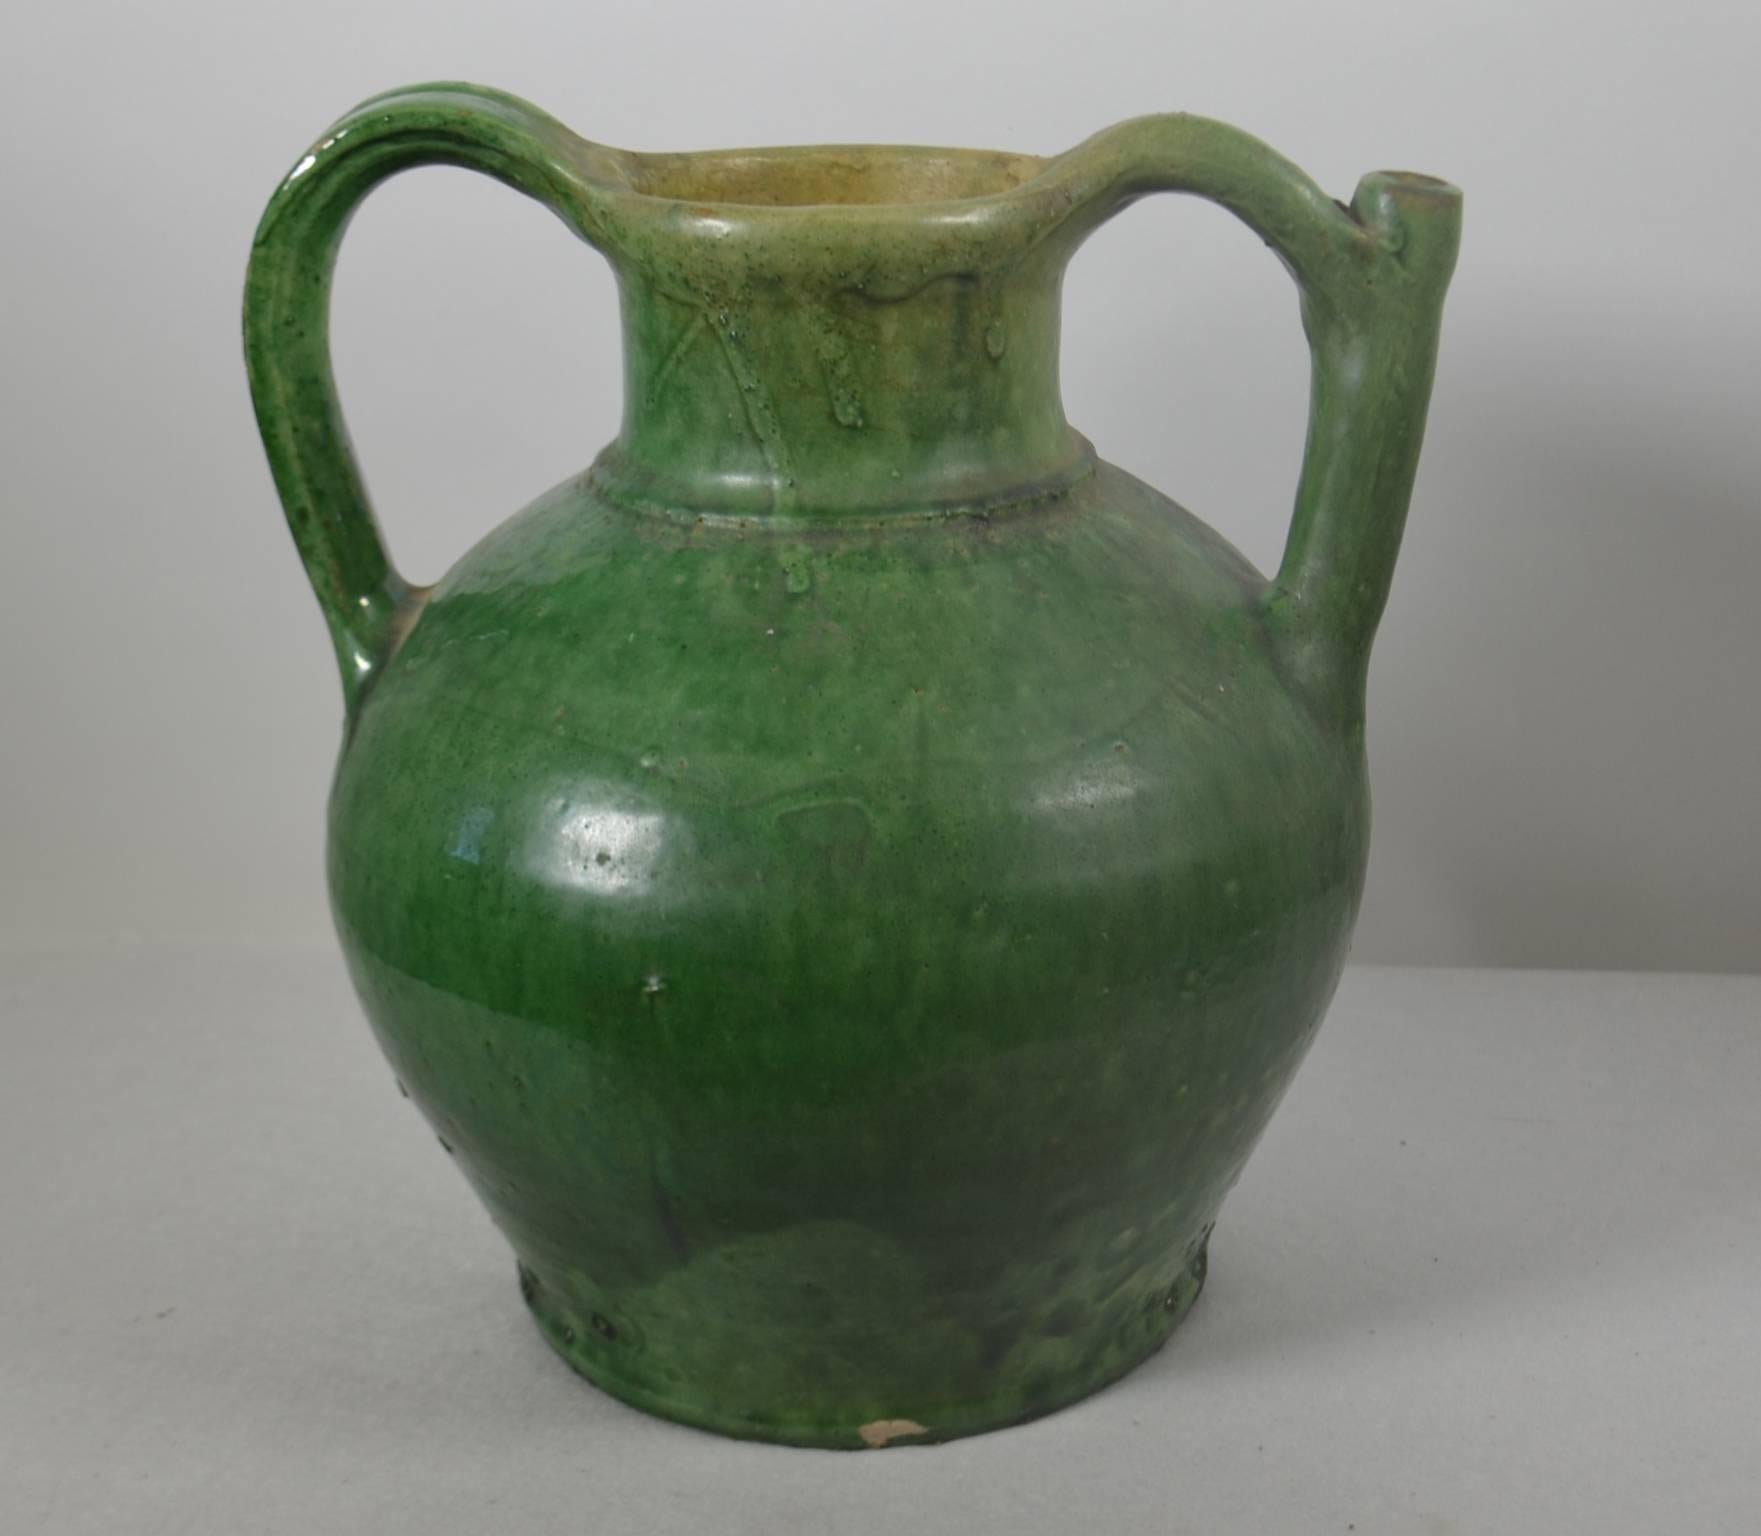 Terracotta jug with spout in handle, green glaze, circa 1860. Once a common piece of pottery used daily in French kitchens, these earthenware jugs have become showcase pieces sought by designers and collectors. These beautiful vessels offer a depth